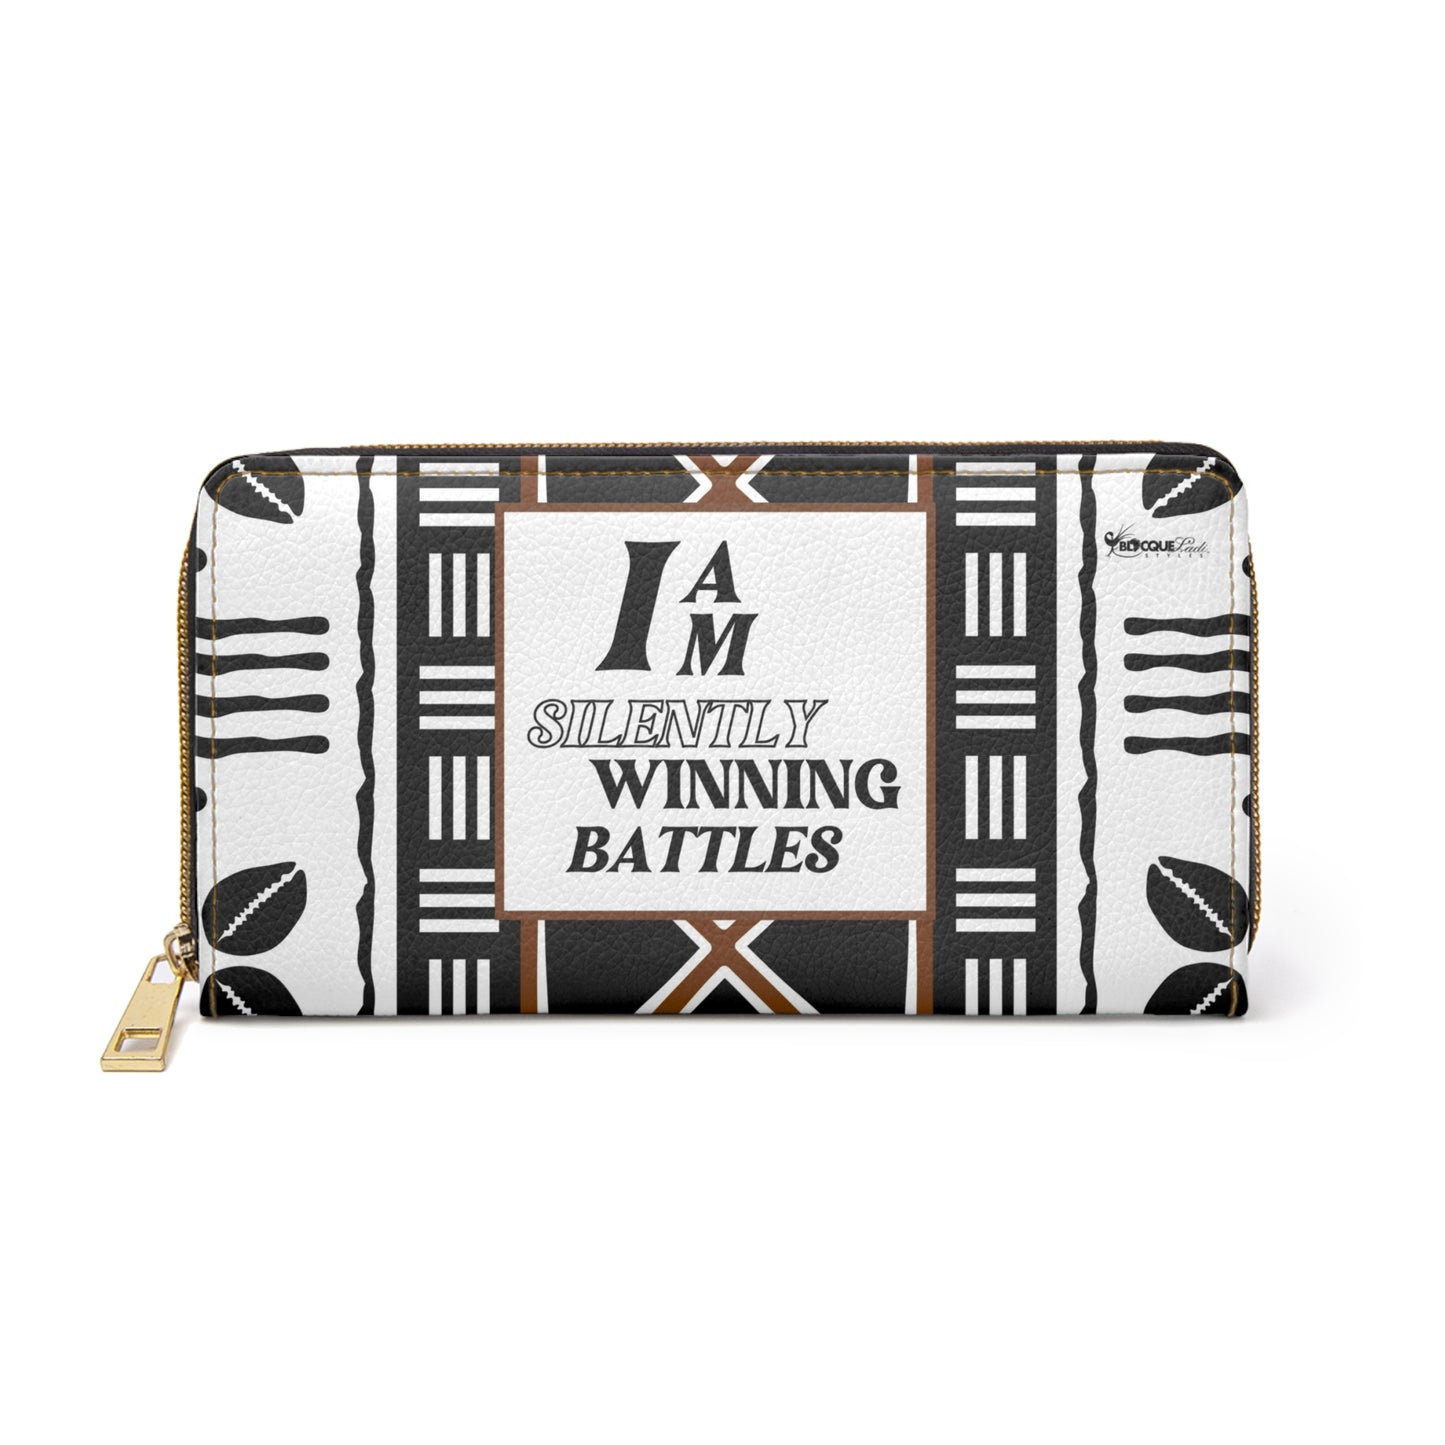 I AM SILENTLY WINNING BATTLES- Positive Afrocentric Affirmation Vegan Leather Wallet Bag- Empower Your Style and Self-Love ; Adinkra Print Wallet